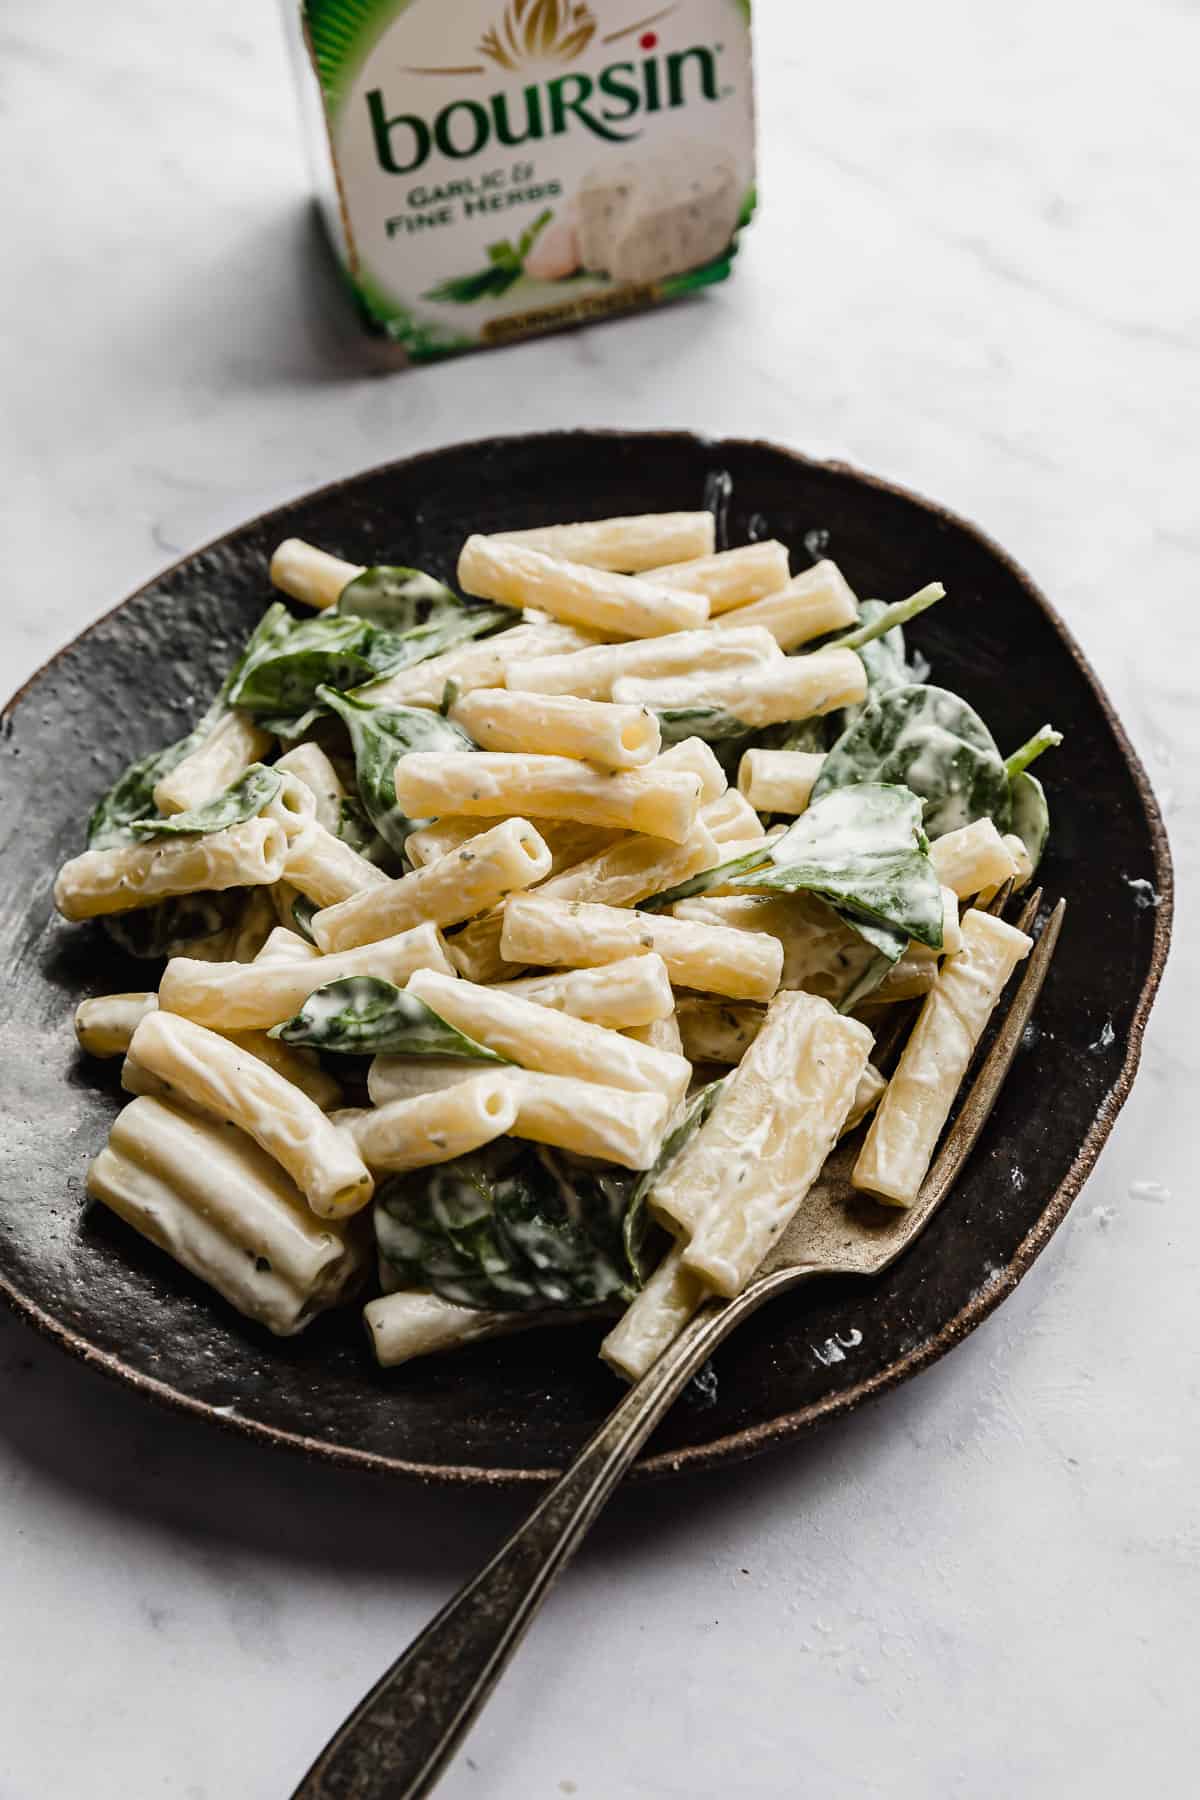 Boursin Pasta with chopped spinach on a black plate with a Boursin white and green cheese box in the background.